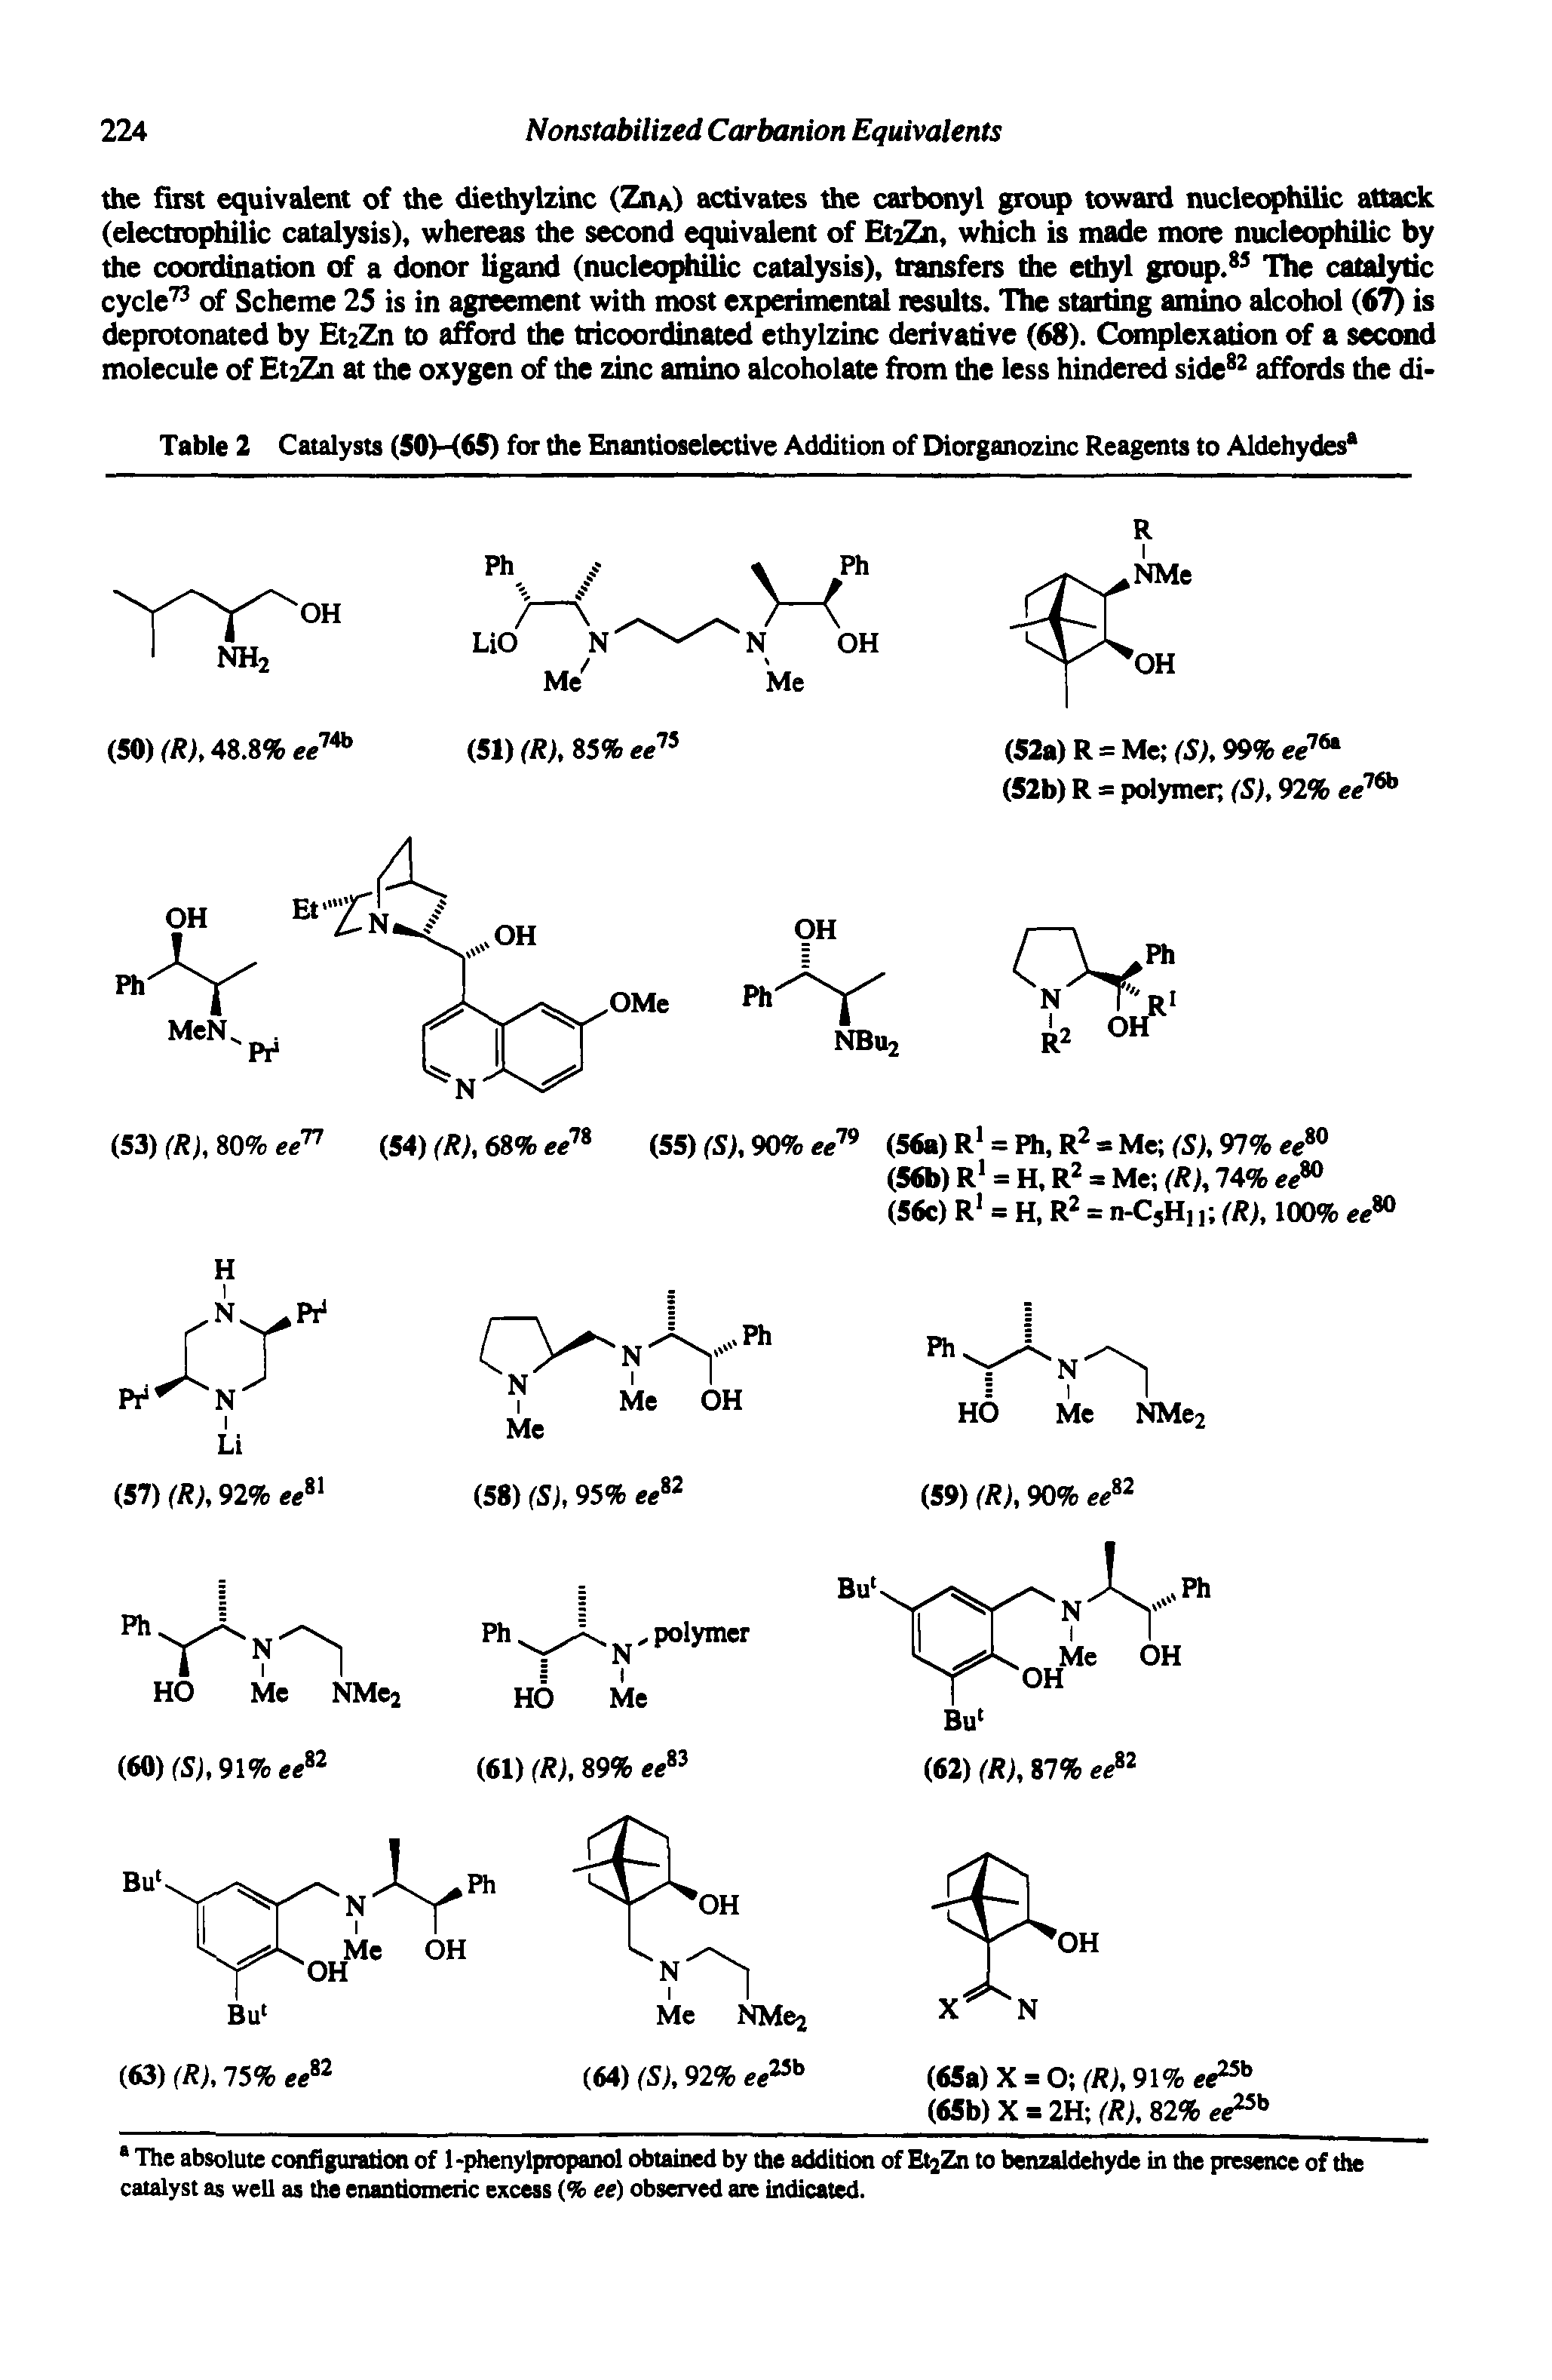 Table 2 Catalysts (50)-(65) for the Enantioselective Addition of Diorganozinc Reagents to Aldehydes ...